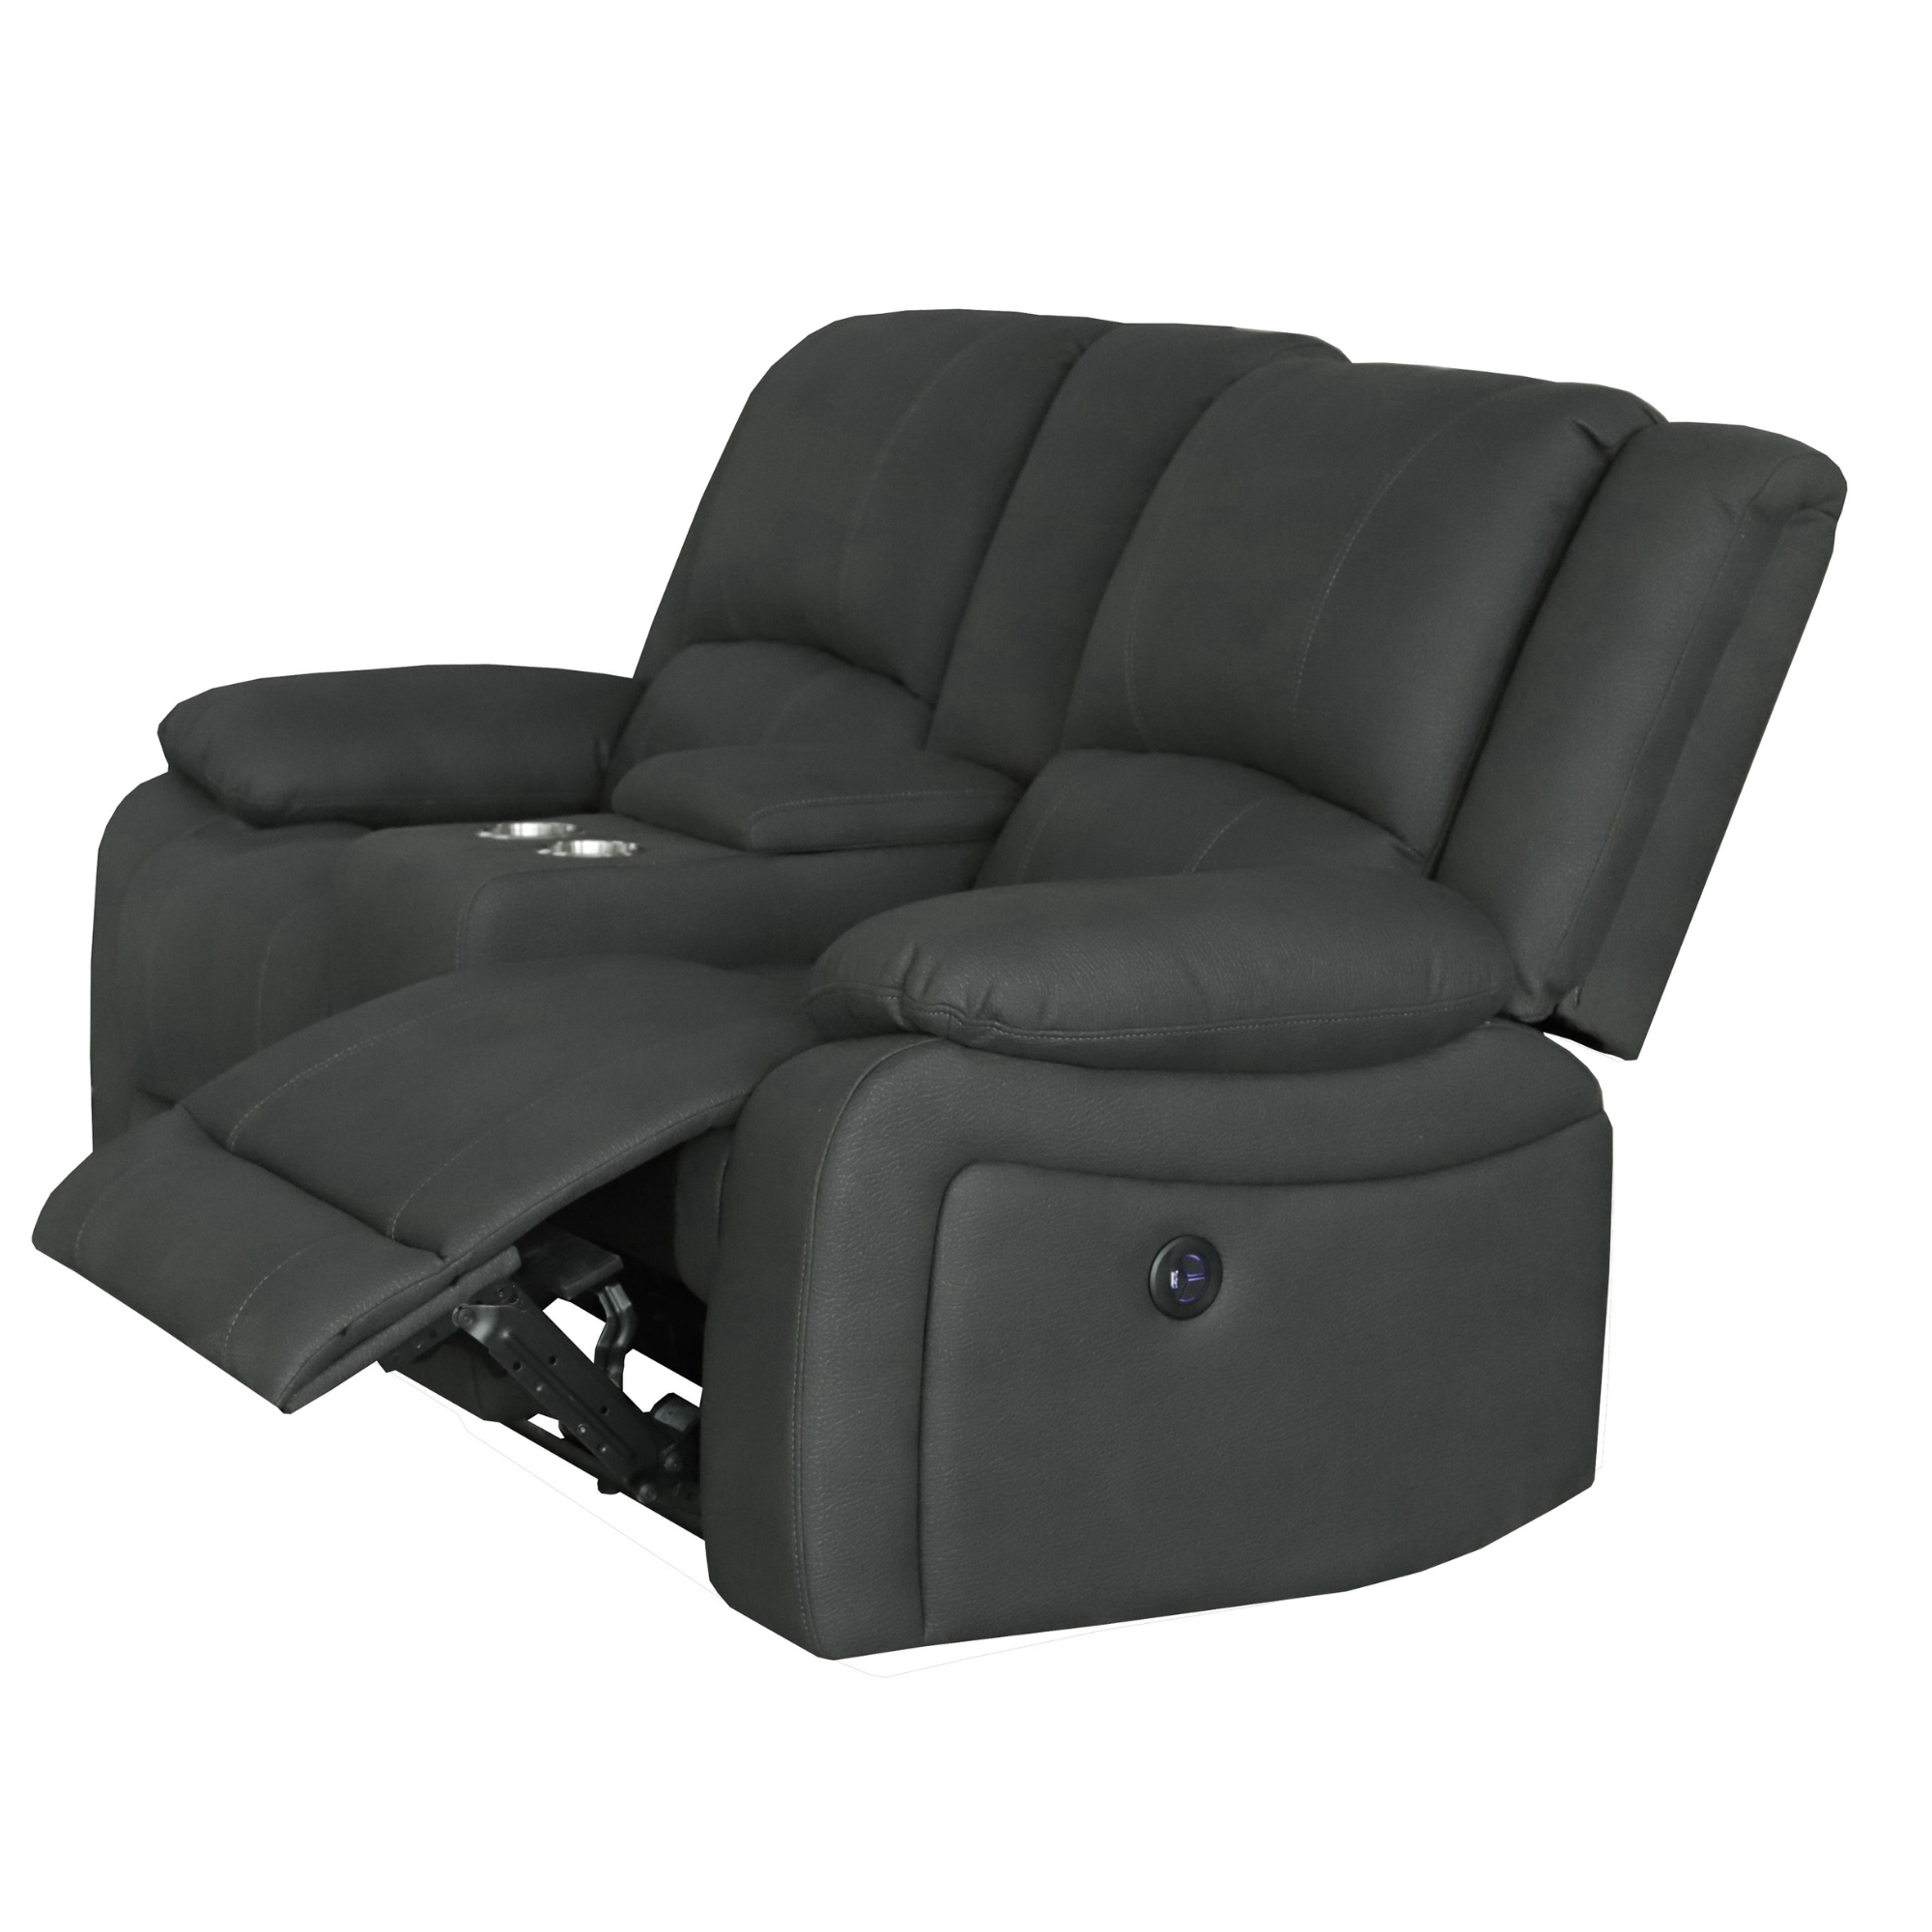 CAPTAIN ELECTRIC 3 SEATER | 2 SEATER | RECLINER | PIECES SOLD SEPARATELY | 2 COLOURS